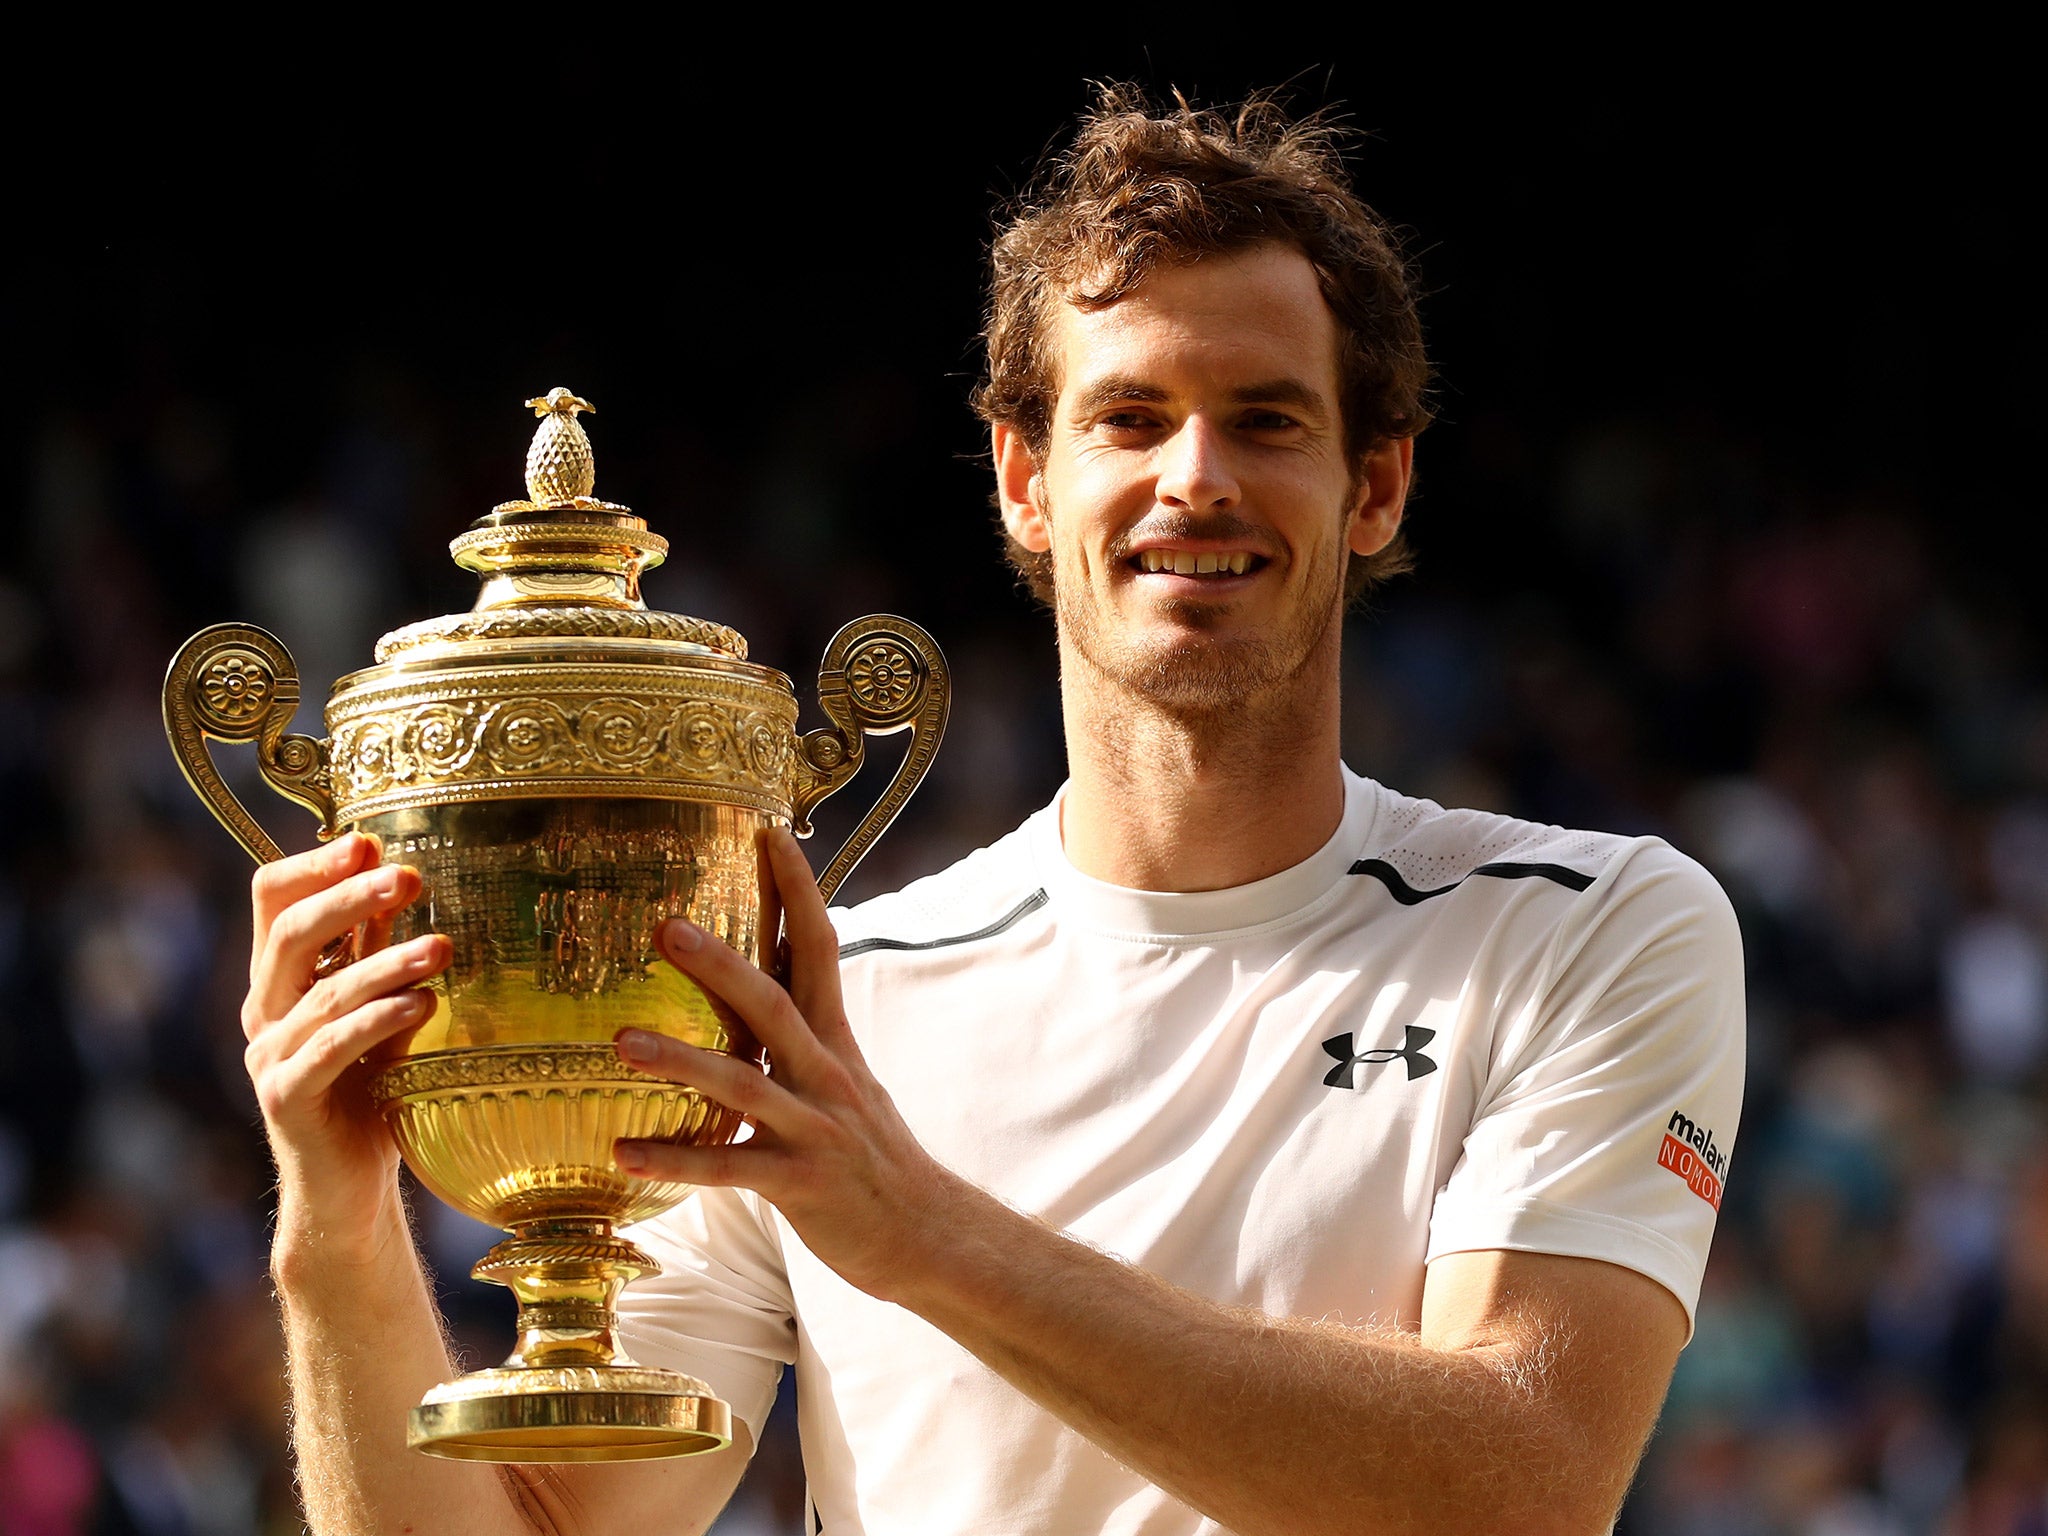 Murray was visibly emotional as he fought back tears before being presented with the trophy